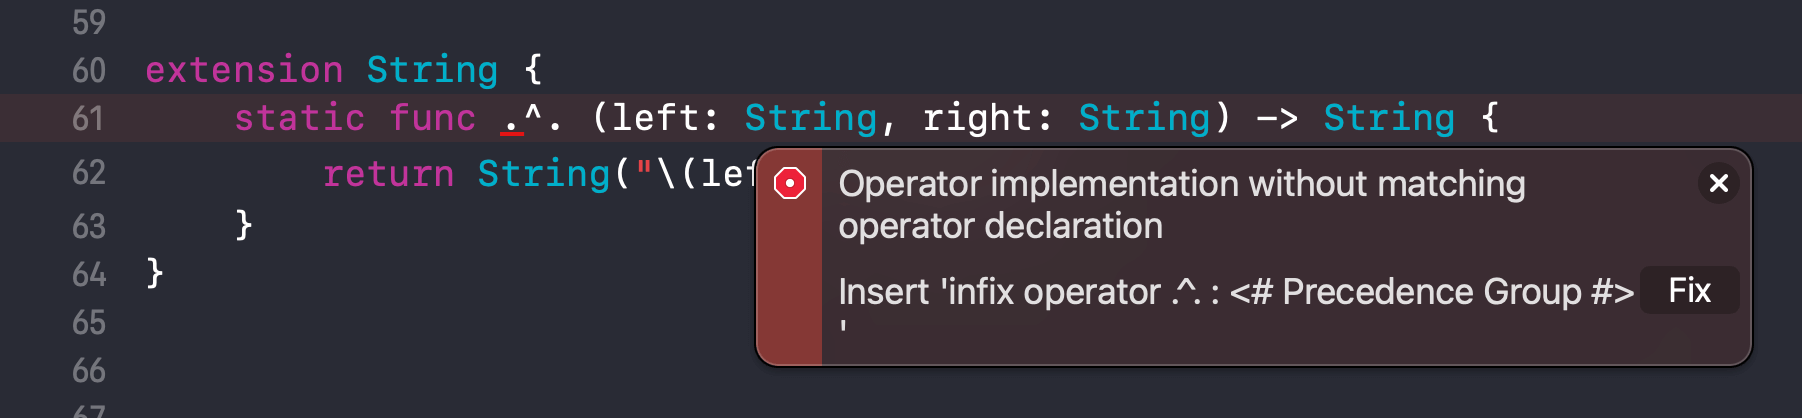 Operator implementation without matching operator declaration error